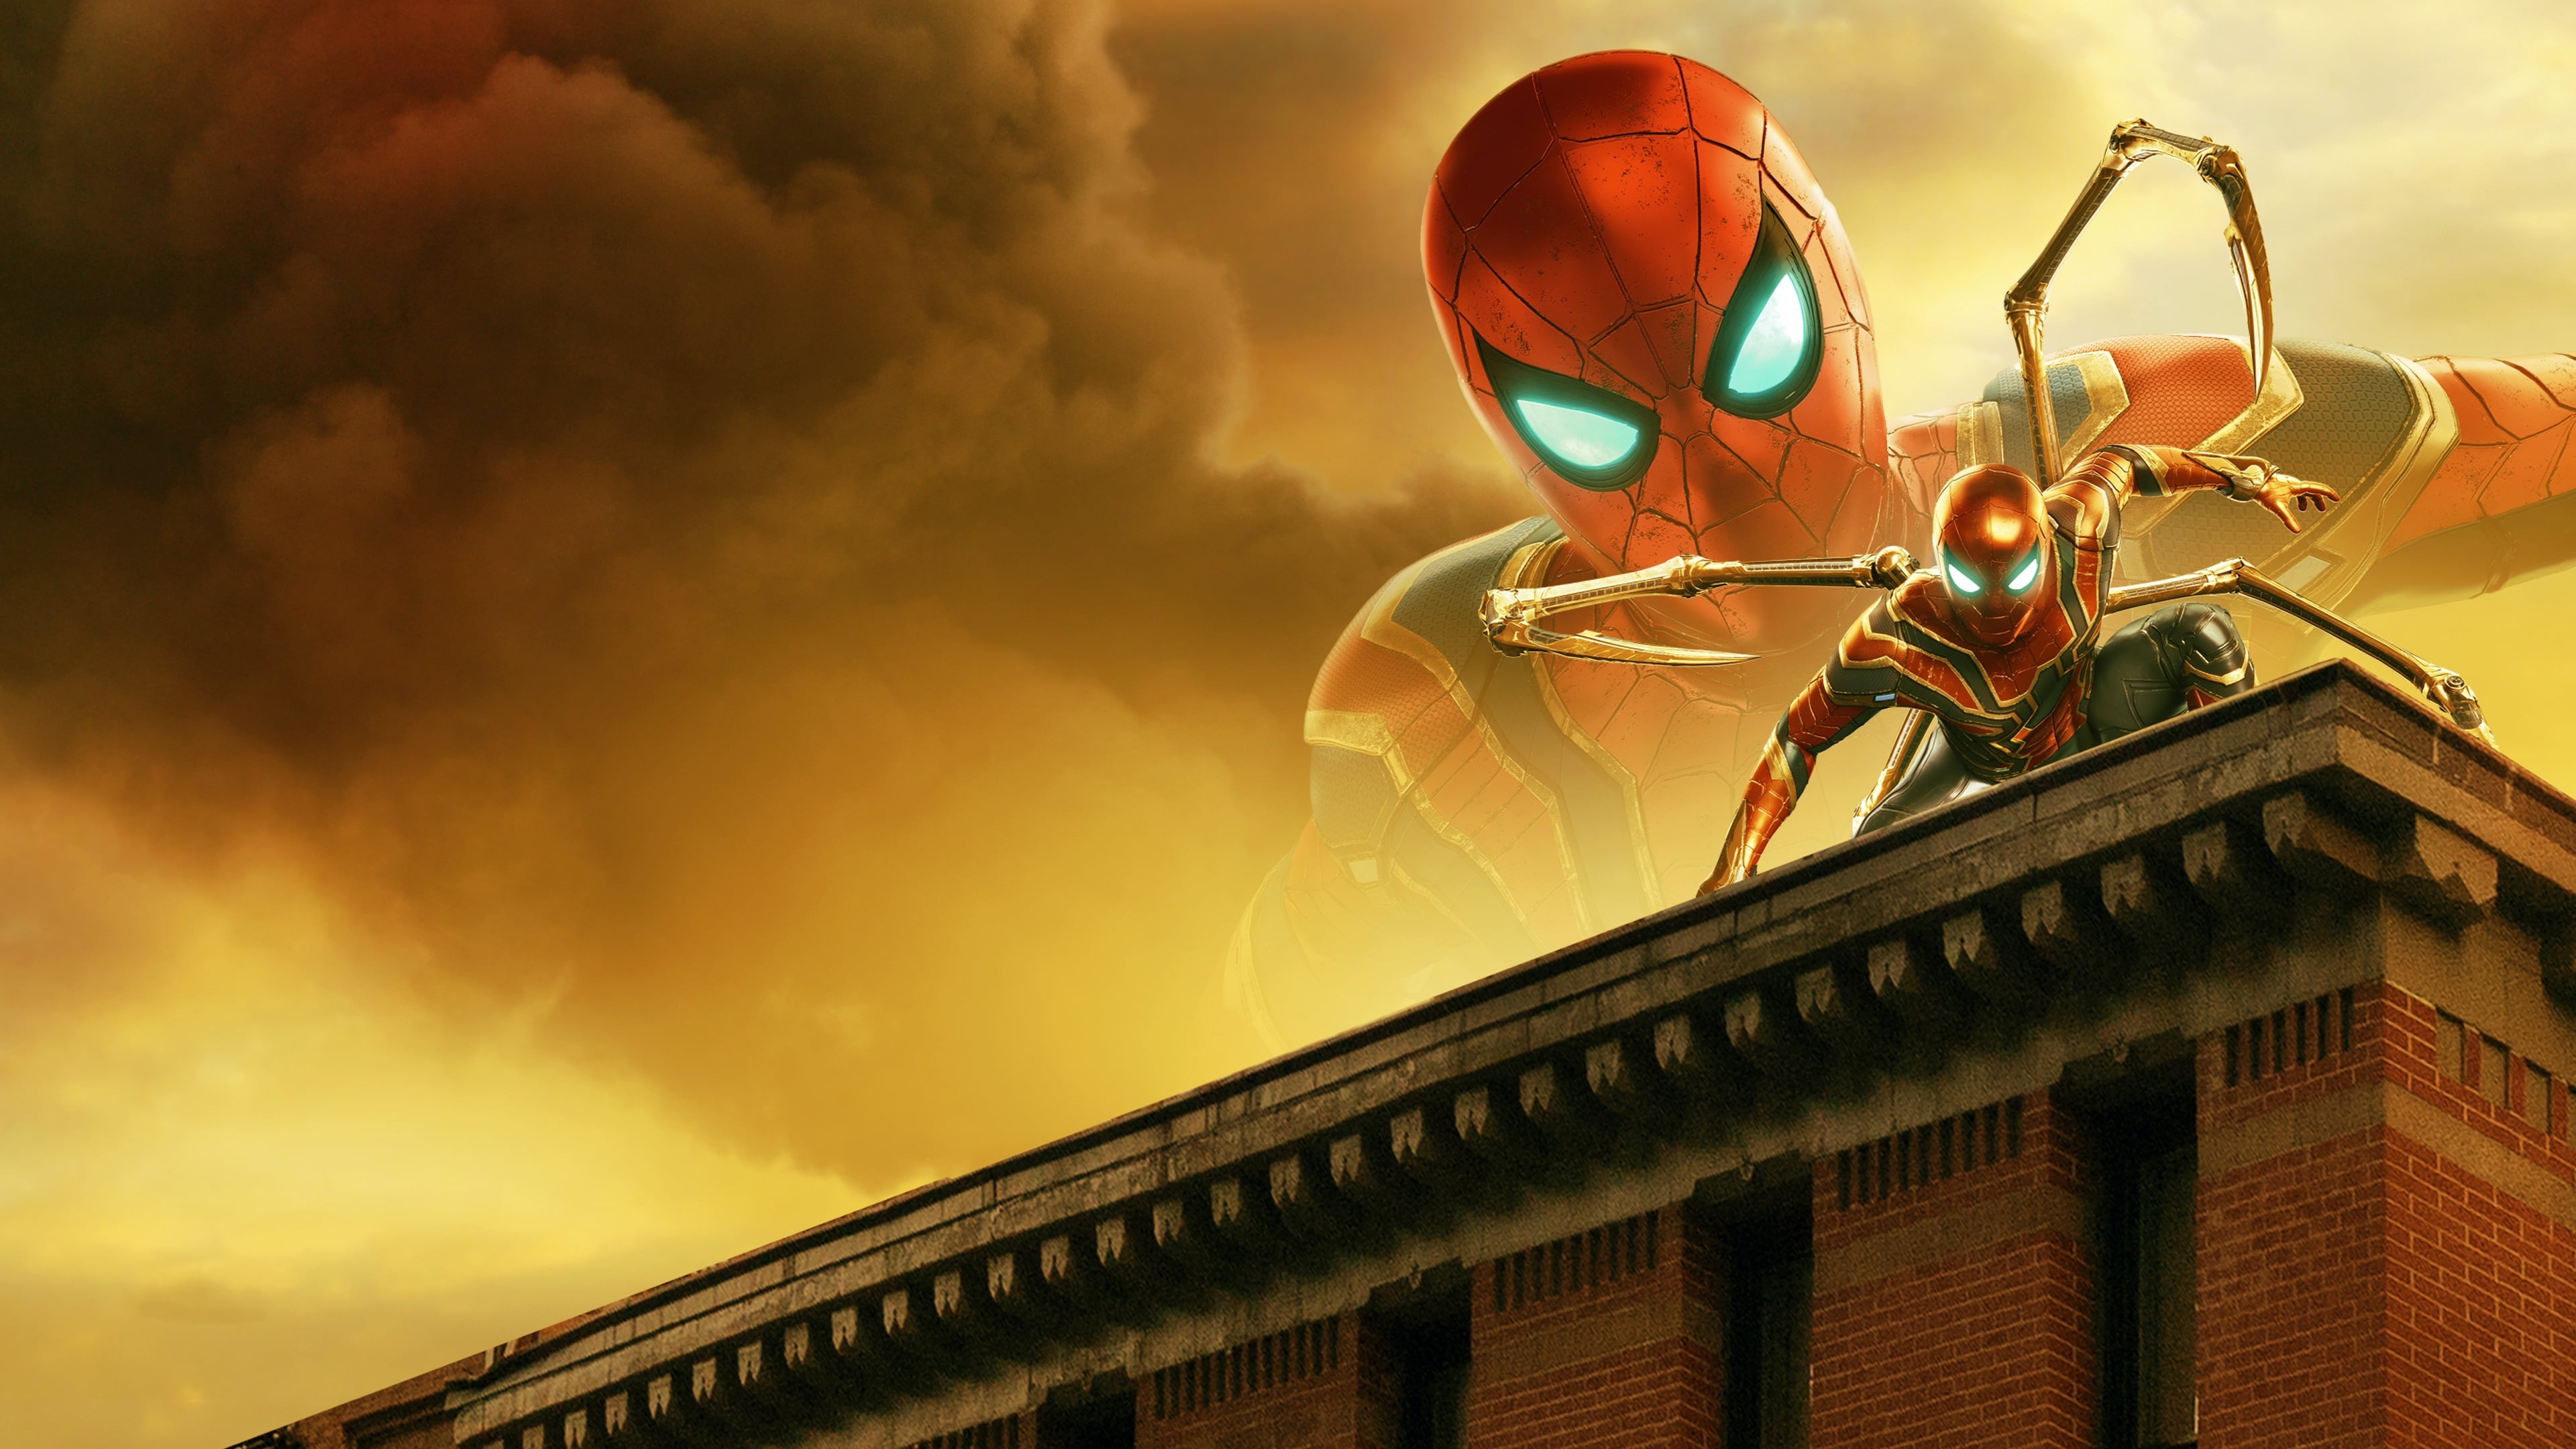 Spider-Man: Far from Home (2019) 123 Movies Online